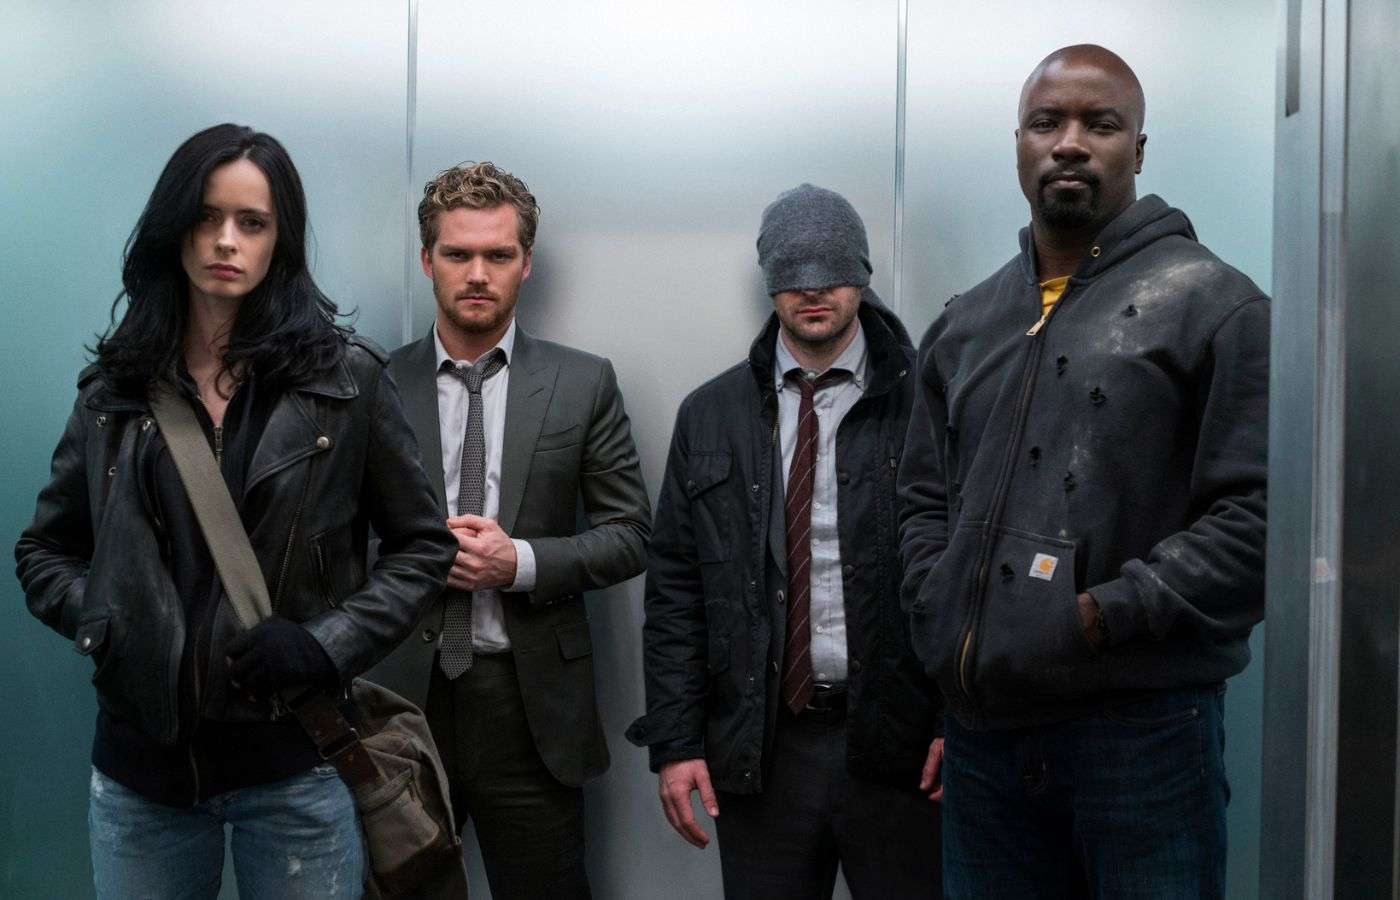 The cast of Marvel show The Defenders